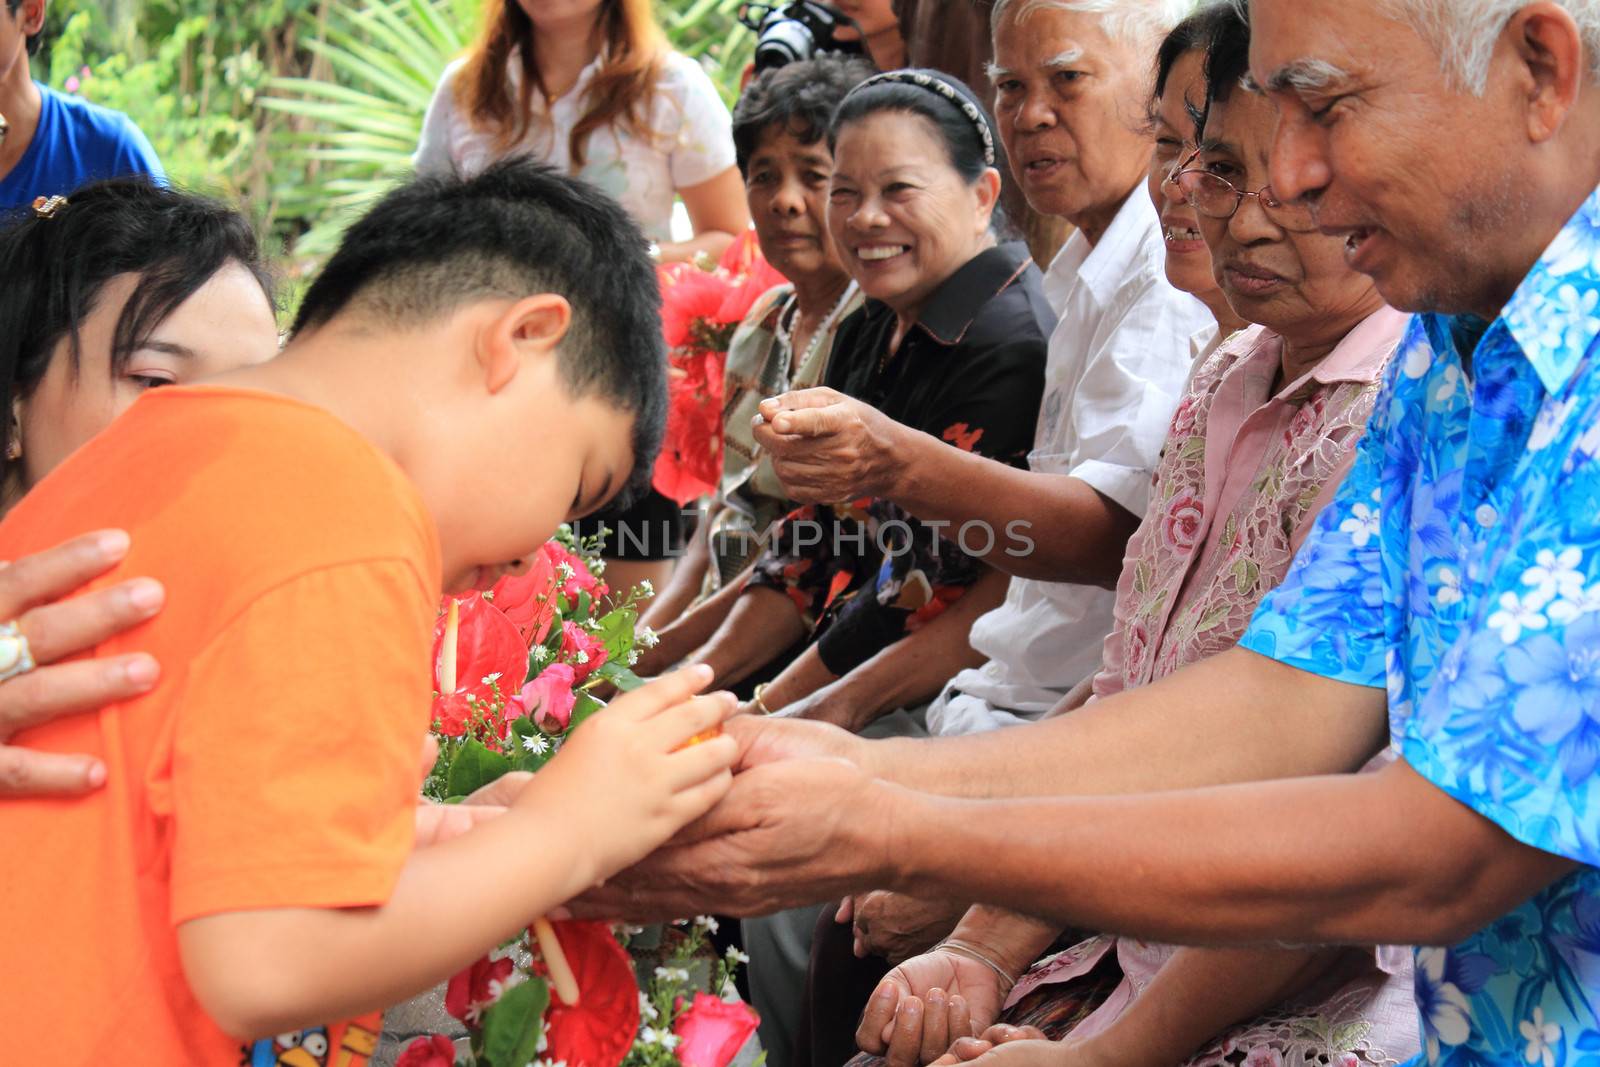 KRABI, THAILAND - APRIL 16: Unidentified Thai boy 10 years old celebrate Songkran (new year / water festival) by giving garlands to their seniors and asked for blessings on April 16, 2013 in Krabi, Thailand.